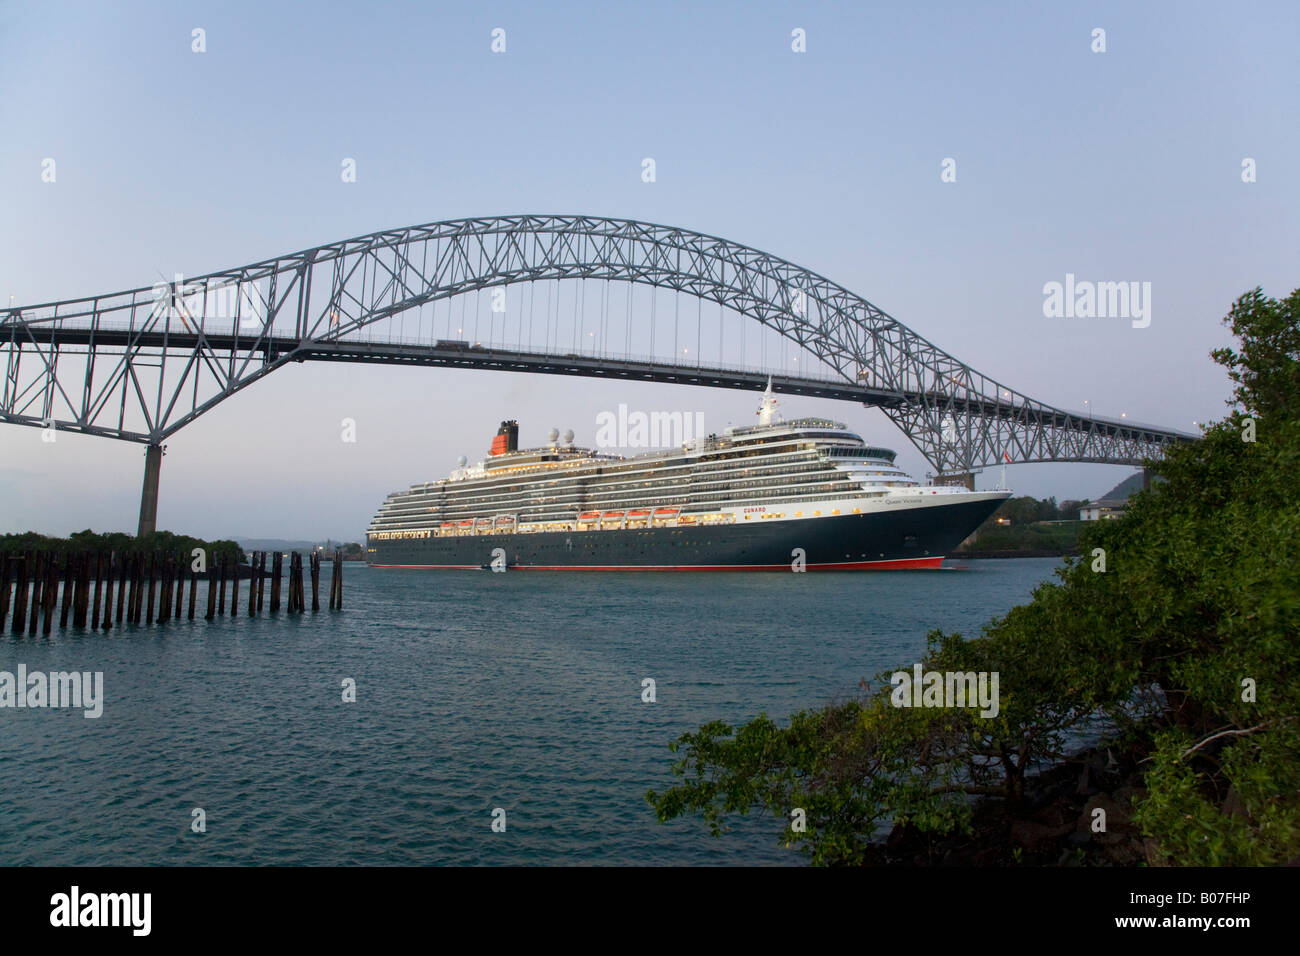 Panama, Panama City, The Queen Victoria cruise ship on its maiden World Cruise sailing under the Bridge of the Americas Stock Photo